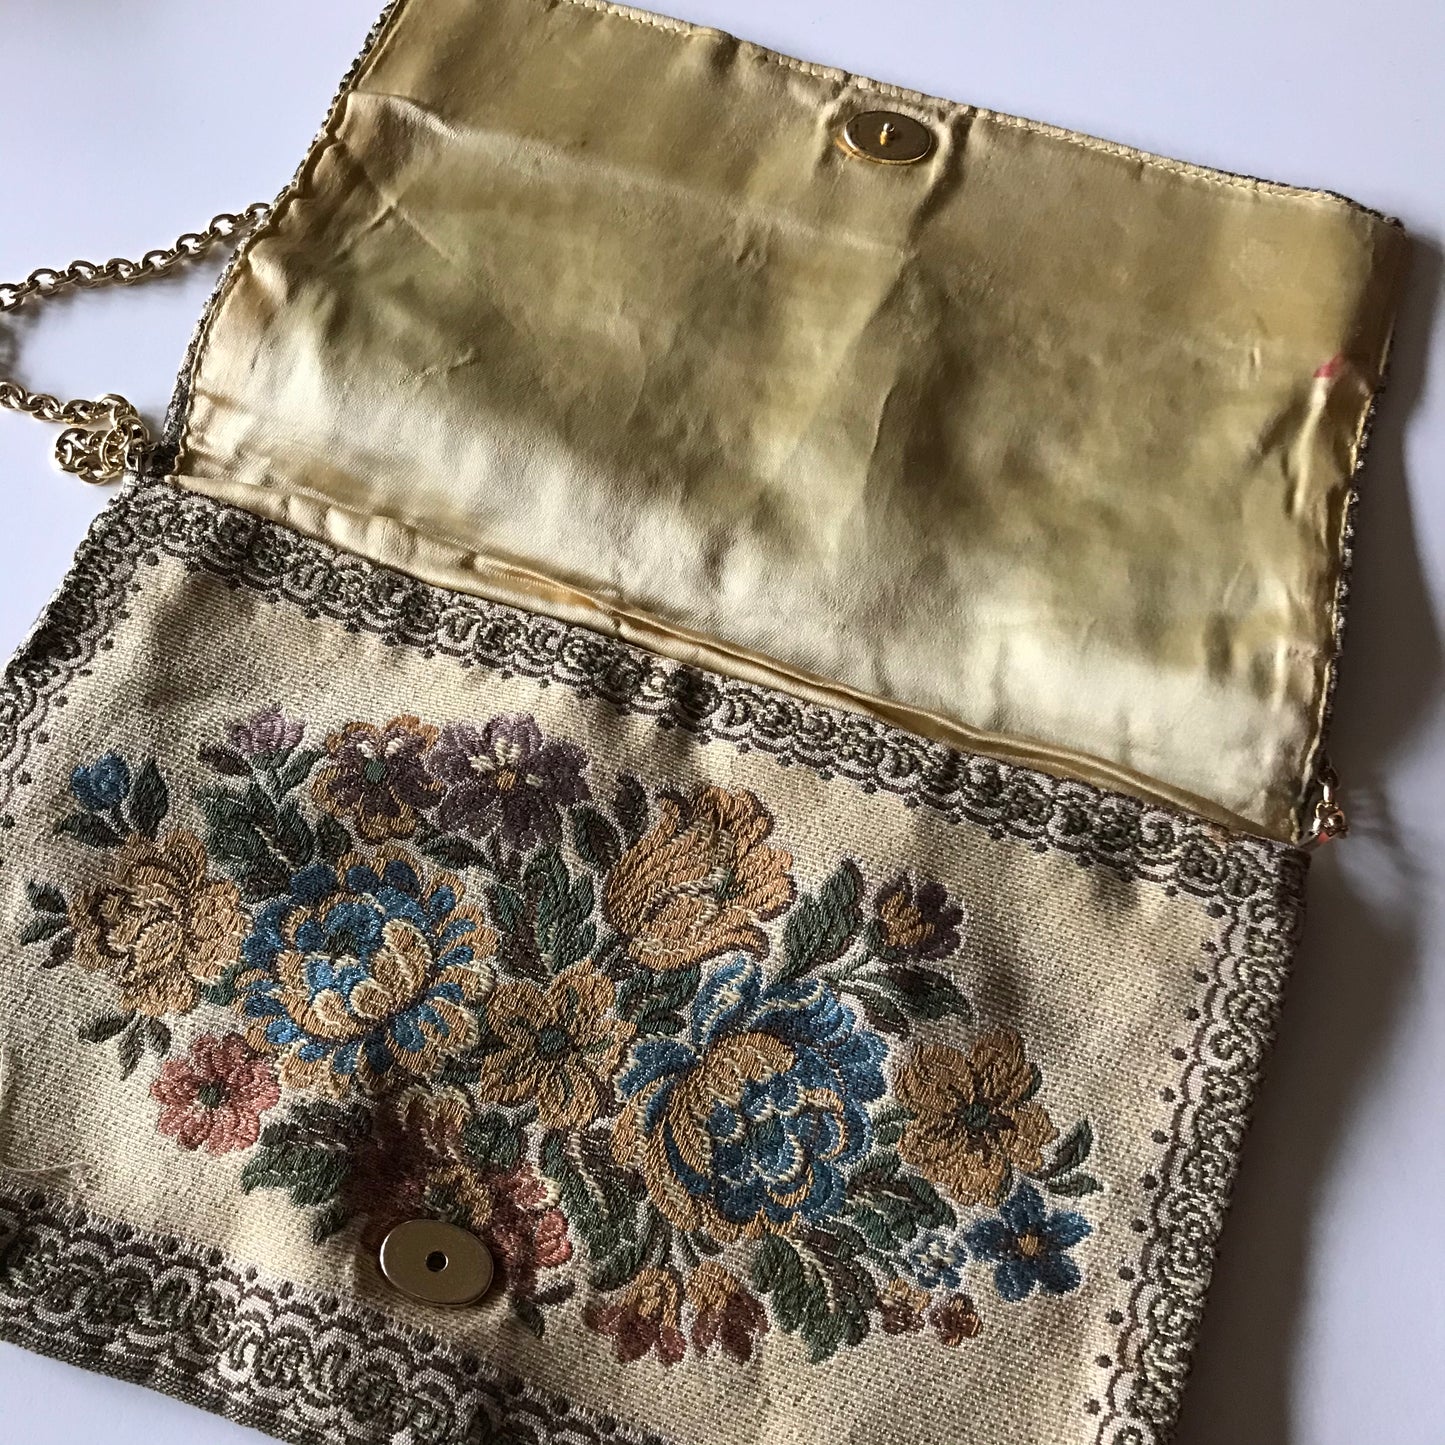 Tapestry Fabric Handbag with Metallic Threads, Gold Tone Clasp and Chain Strap circa 1970s